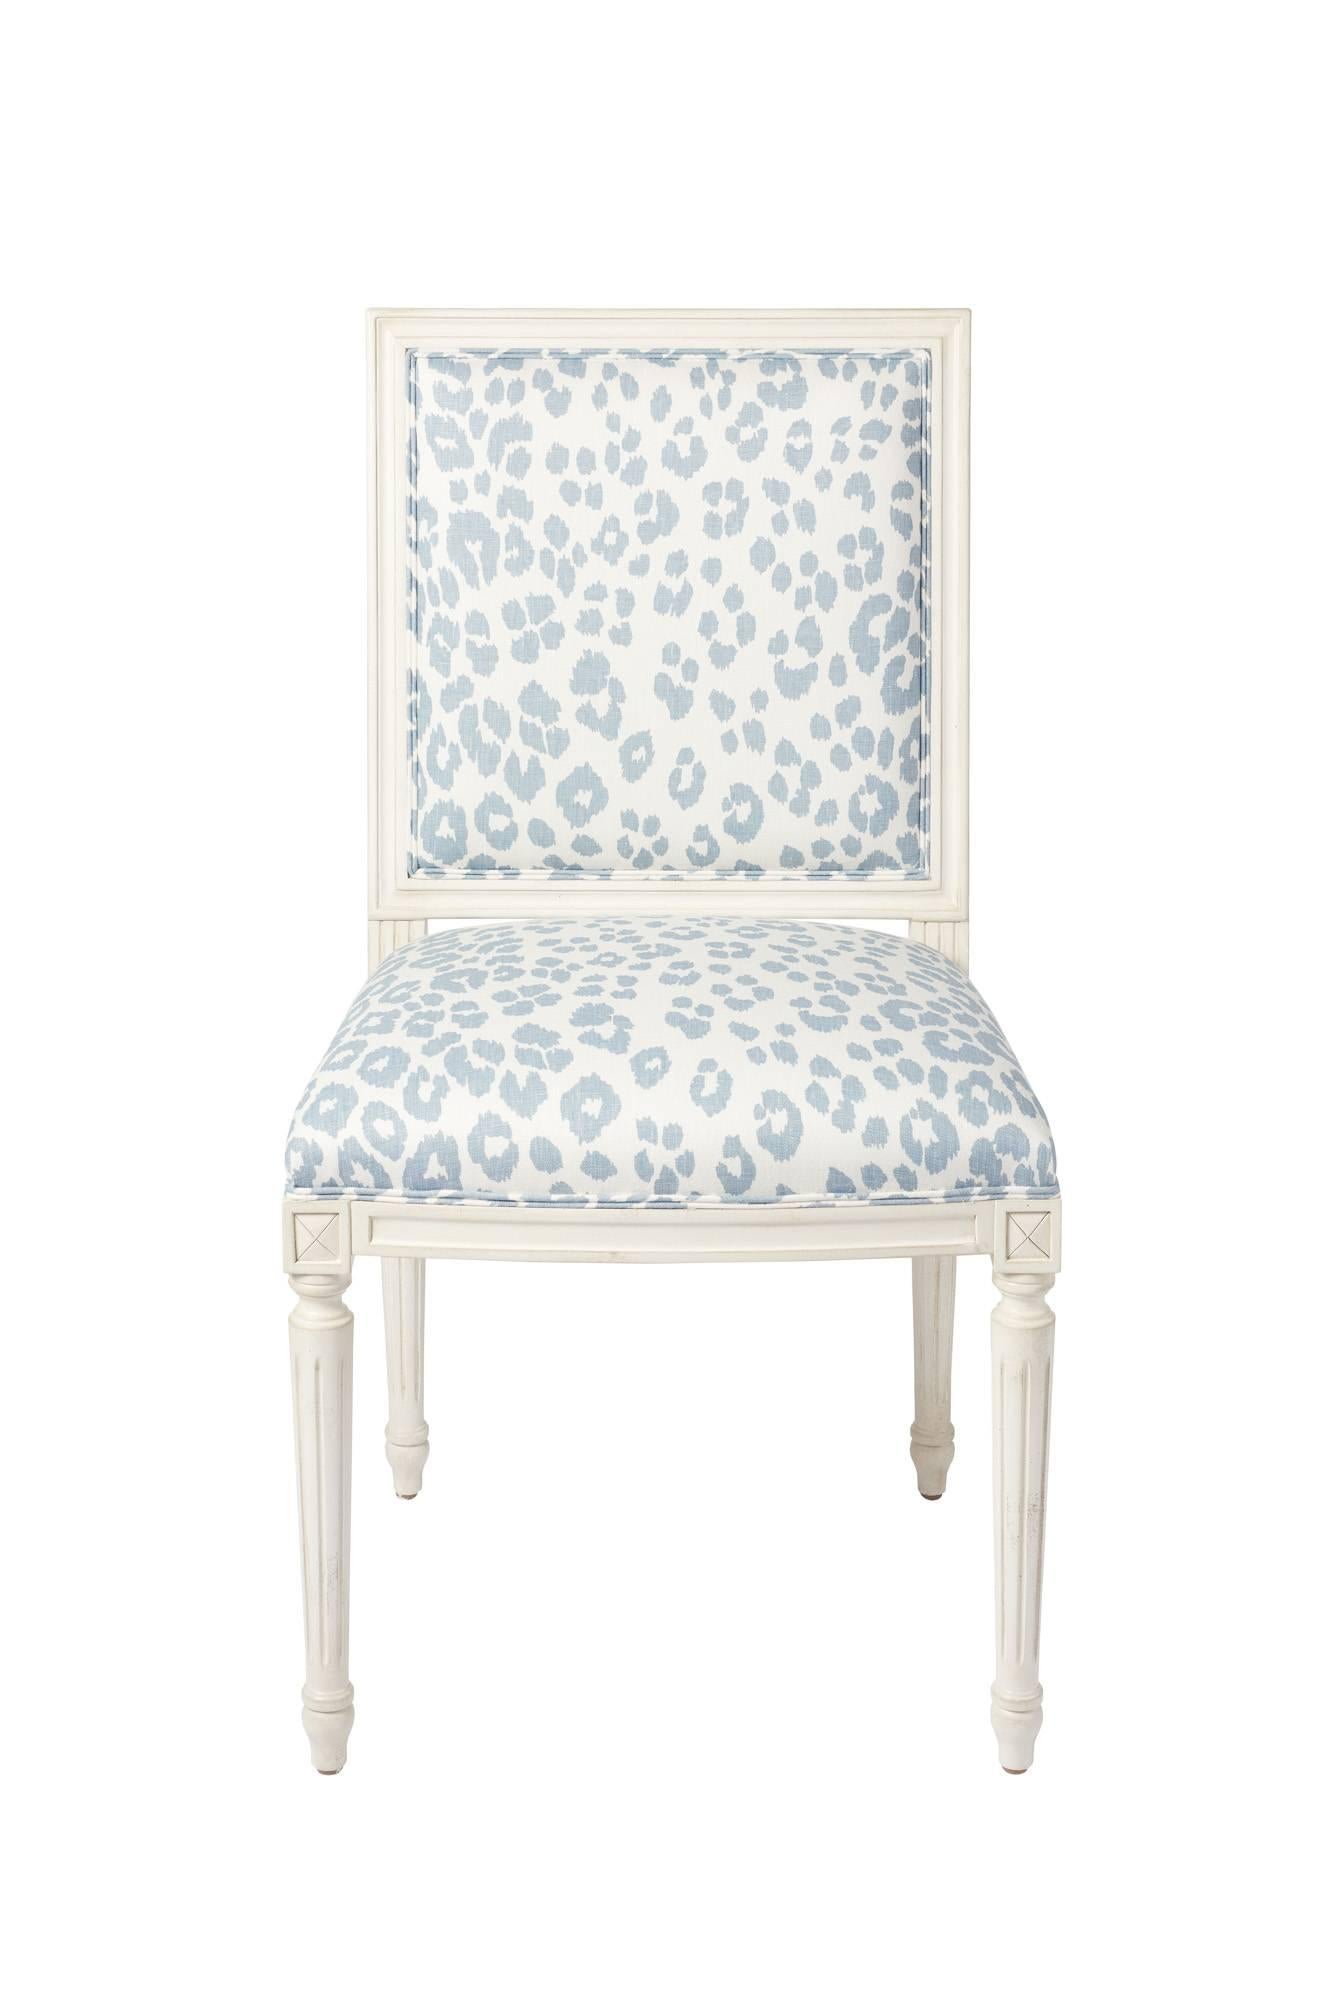 The Marie Therese side chair is a timeless silhouette that features a hand-carved European beechwood frame. Upholstered in the sexy Iconic Leopard pattern; first introduced in the 1970s. This Schumacher Classic pattern is eternally chic! 

Since